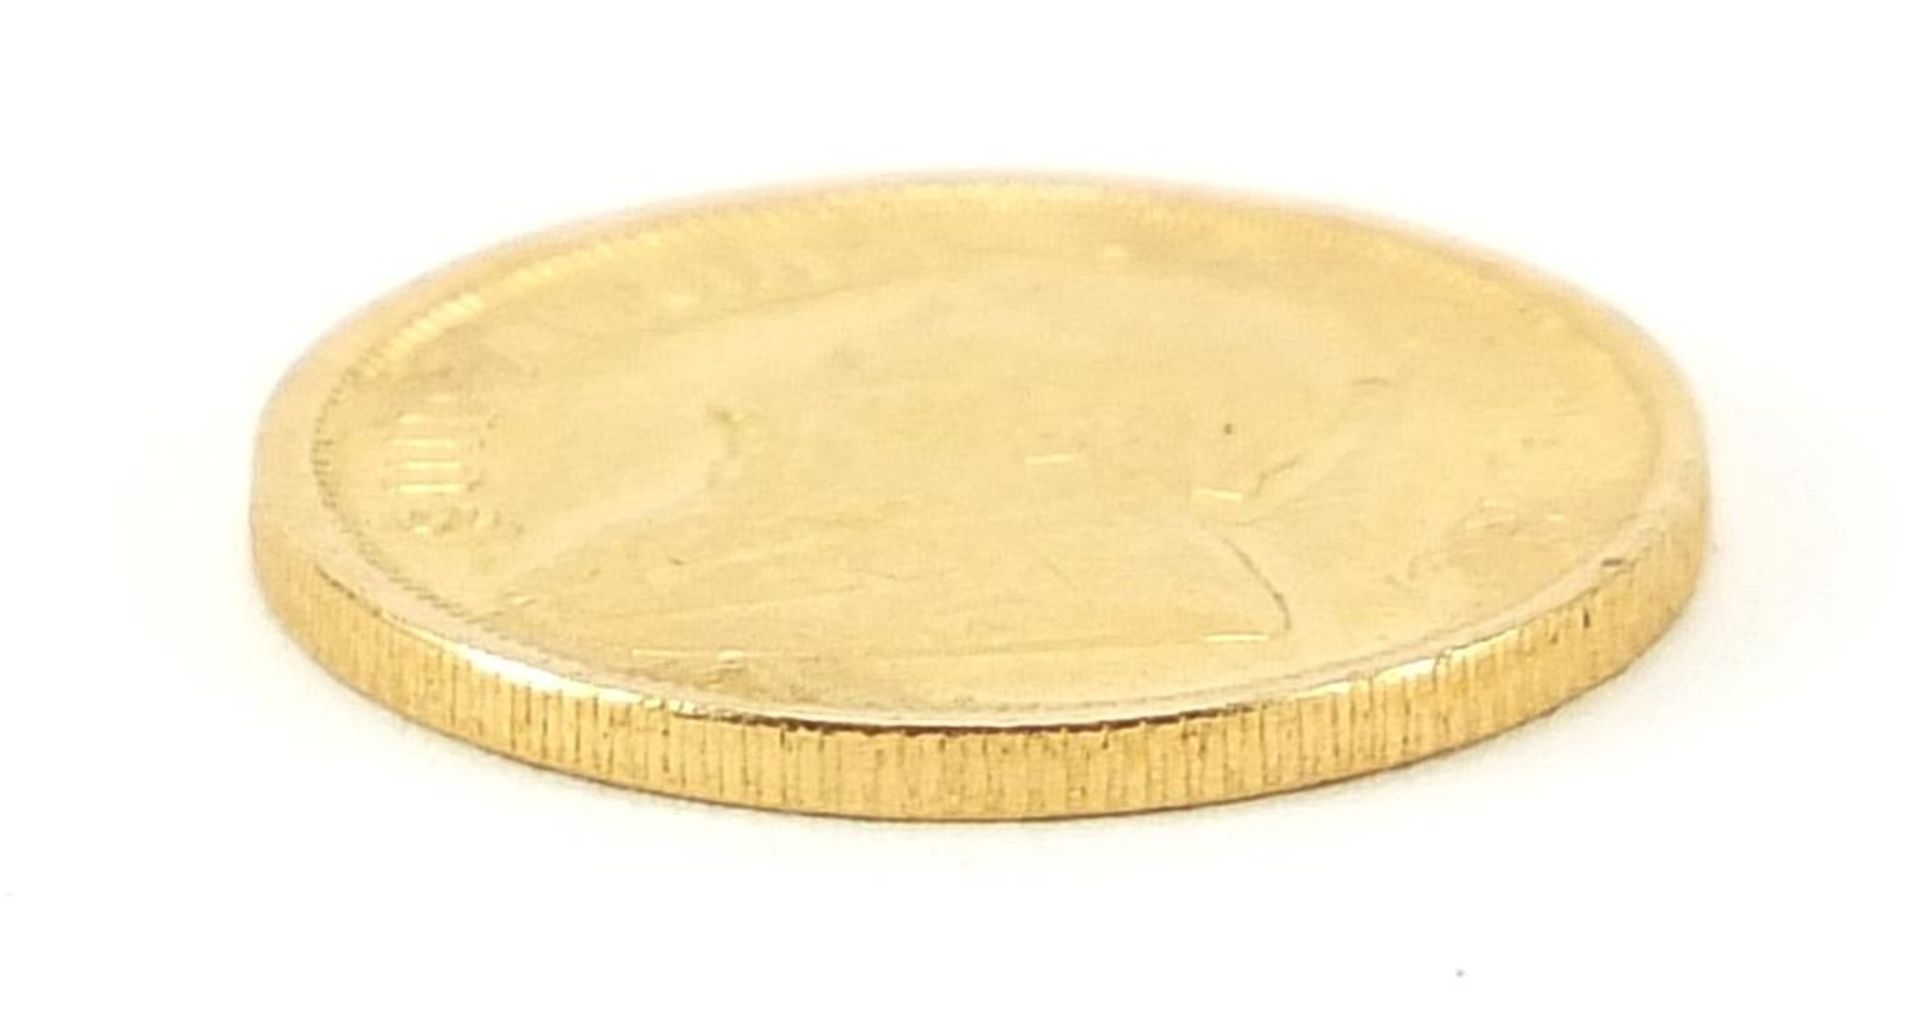 South African 1981 1/10th gold krugerrand - this lot is sold without buyer’s premium - Image 2 of 3